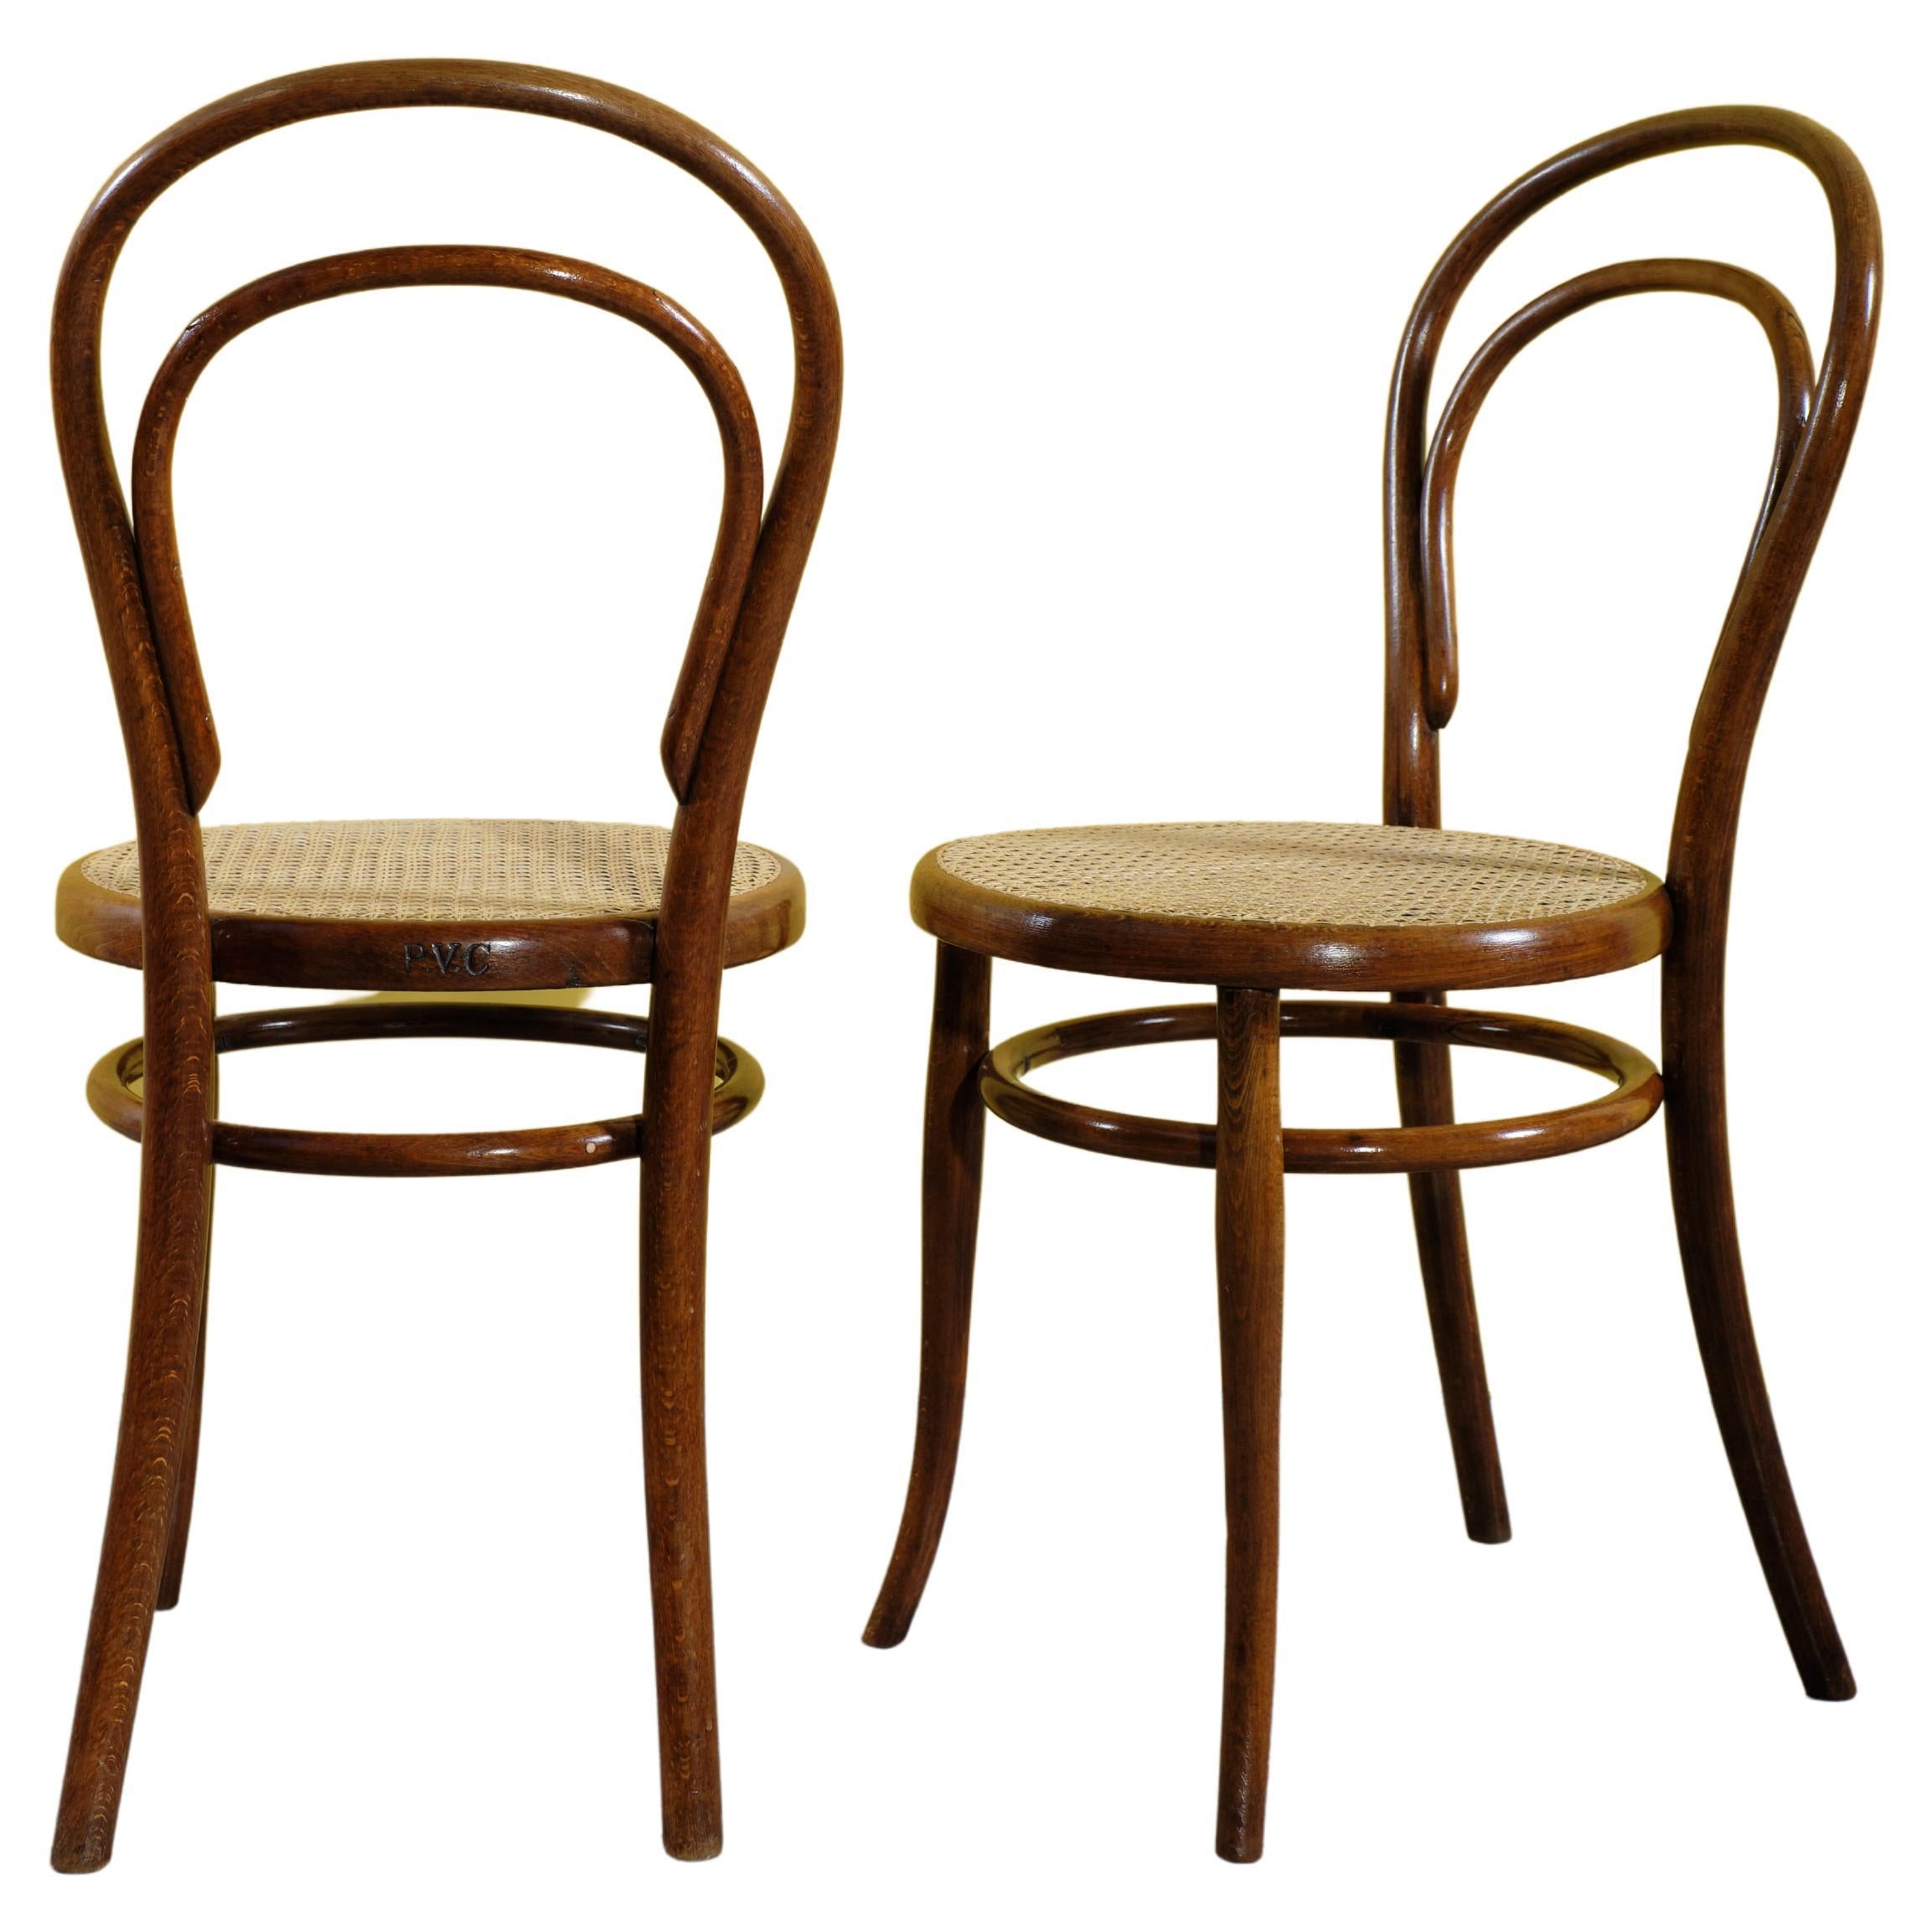 Pair of Early No. 14 Bentwood Side Chairs, by Michel Thonet, bistro chair, 1890s